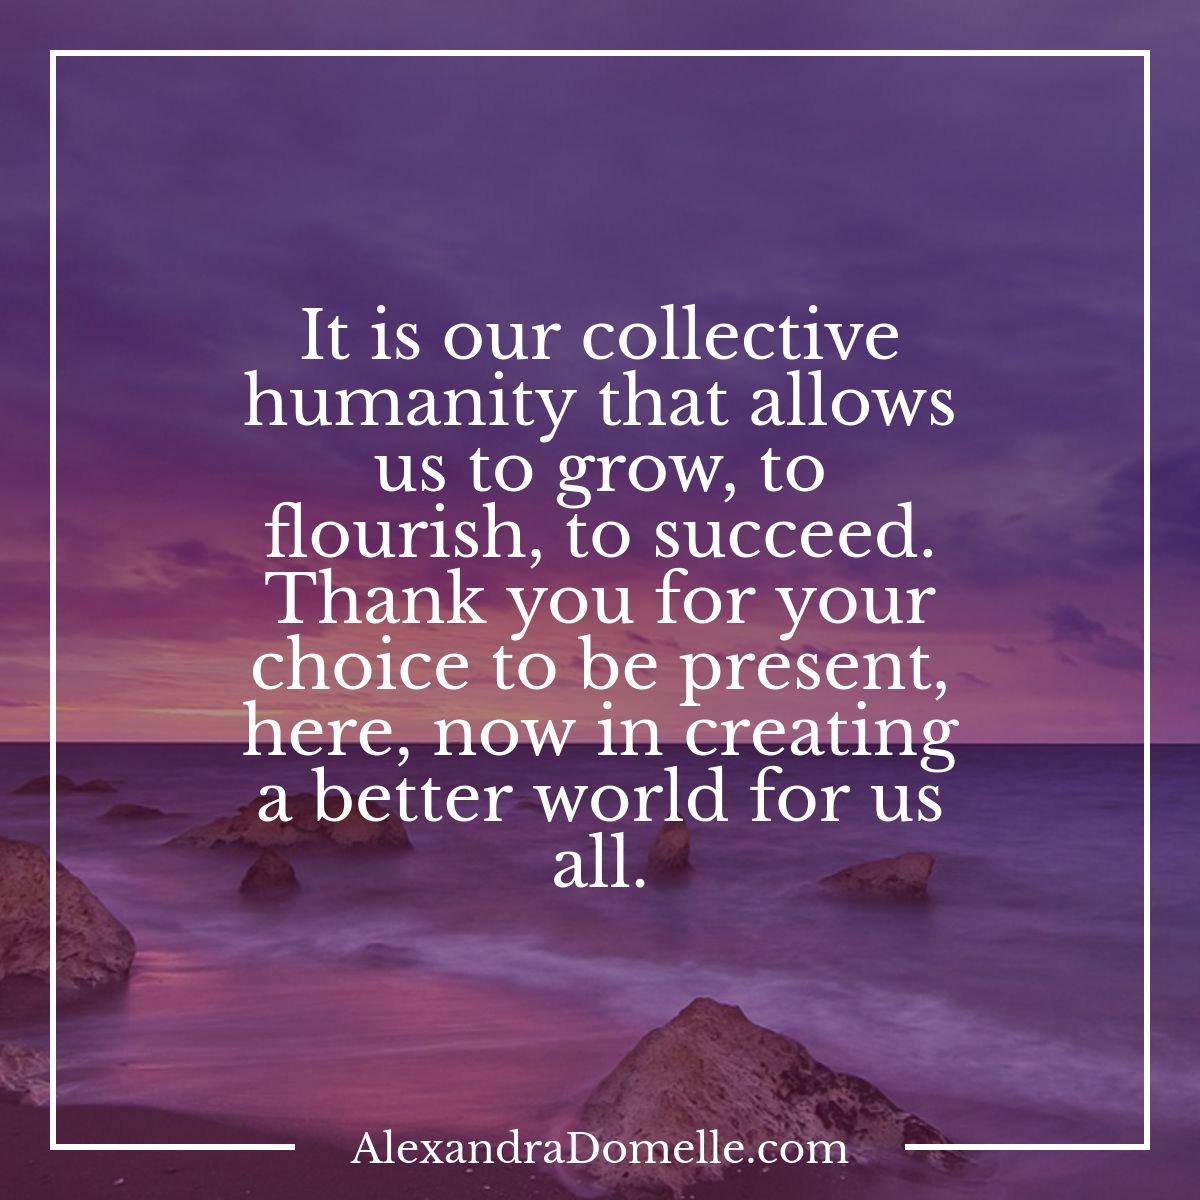 It is our collective humanity that allows us to grow, to flourish, to succeed. Thank you for your choice to be present, here, now in creating a better world for us all. - Alexandra Domelle #IQRTG #TrueGiversRevolution #SuccessTrain #JoyTrain #Mindfulness #TheMindfulMoment